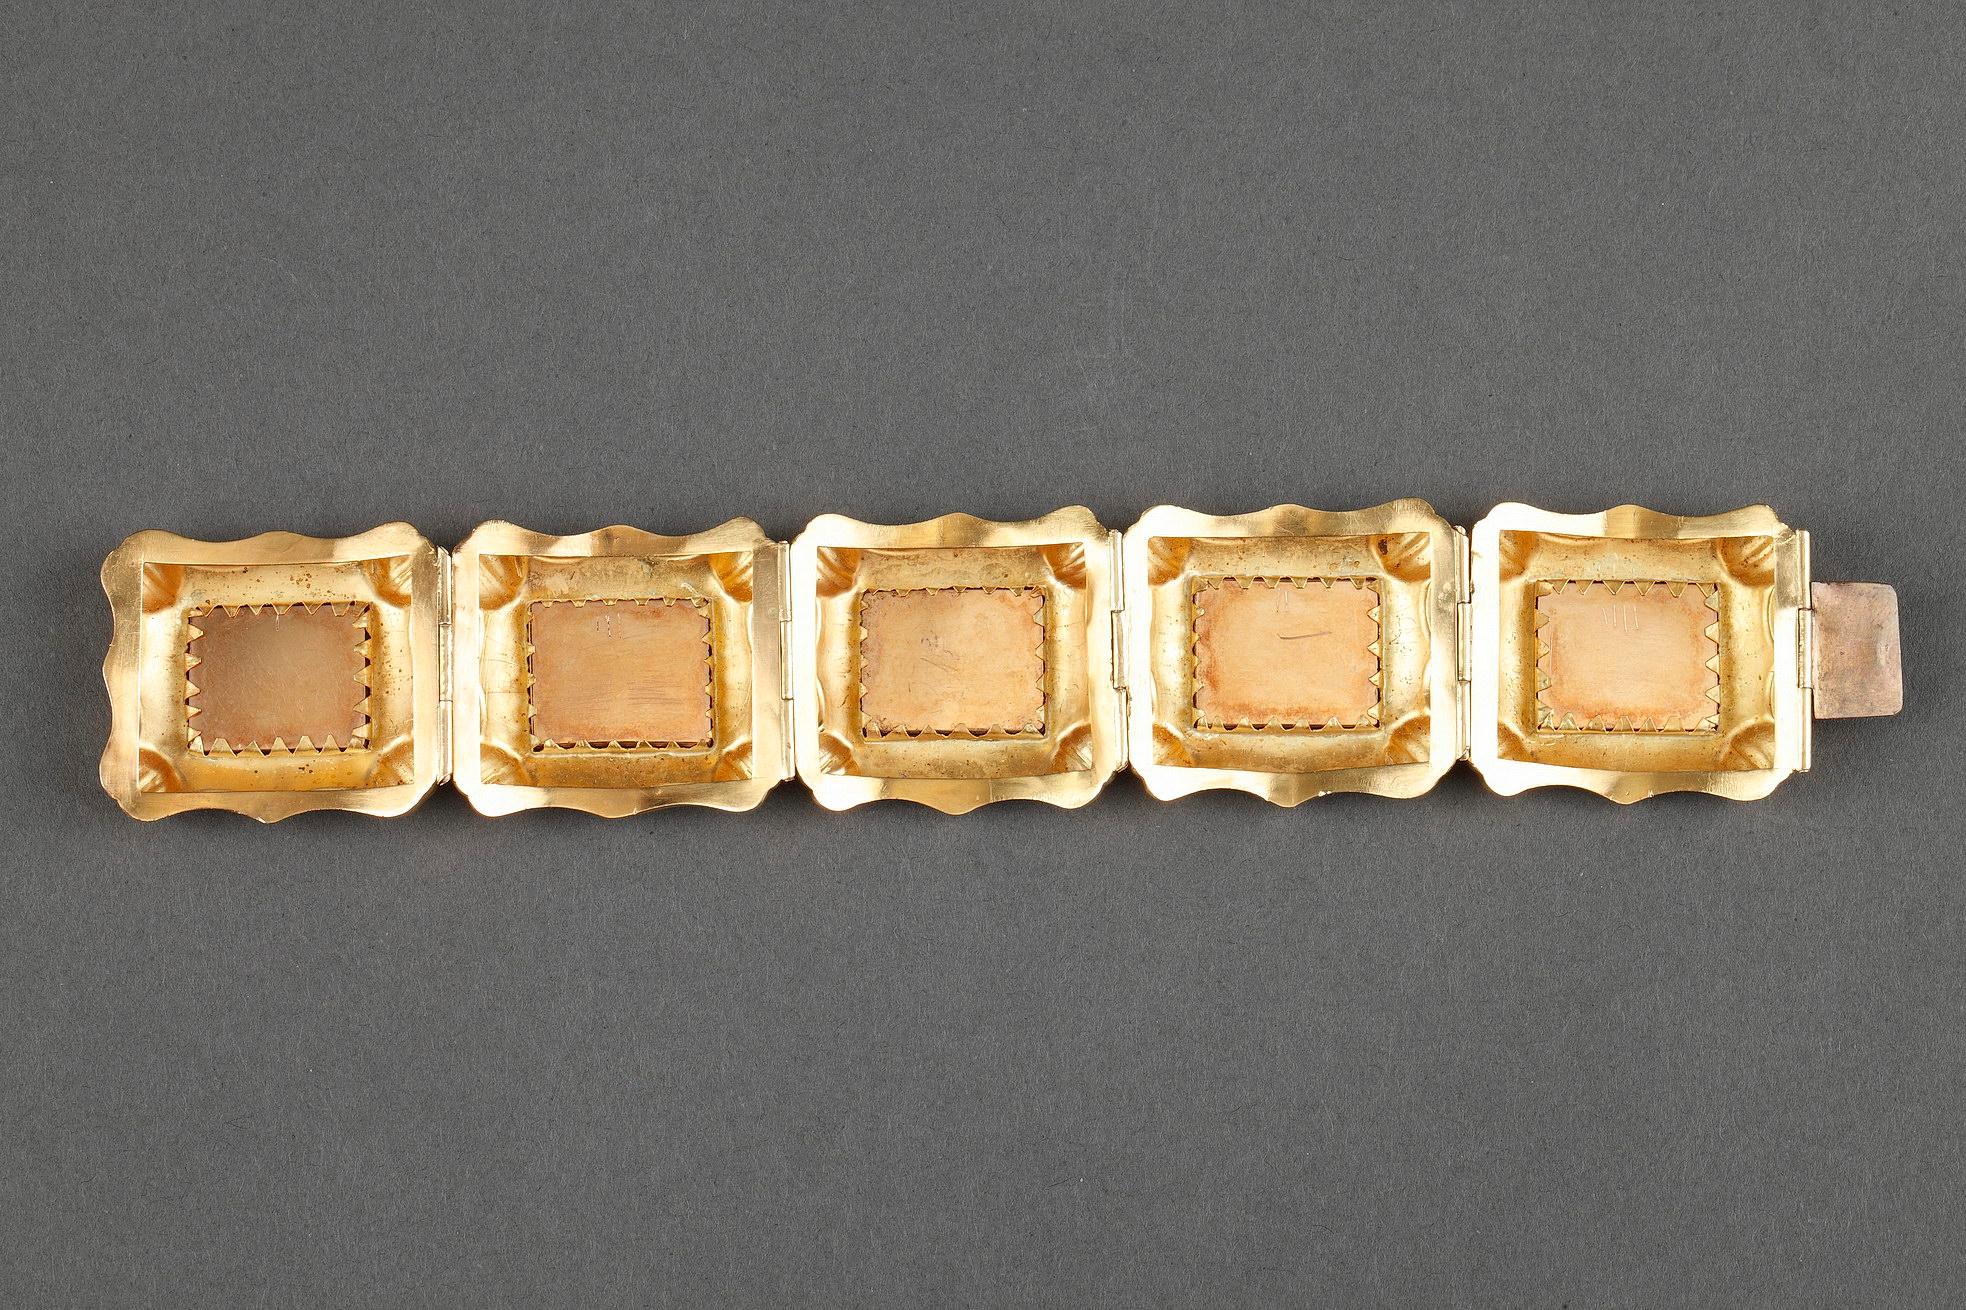 Gold and Micromosaic Bracelet, First Half of the 19th Century Work For Sale 11